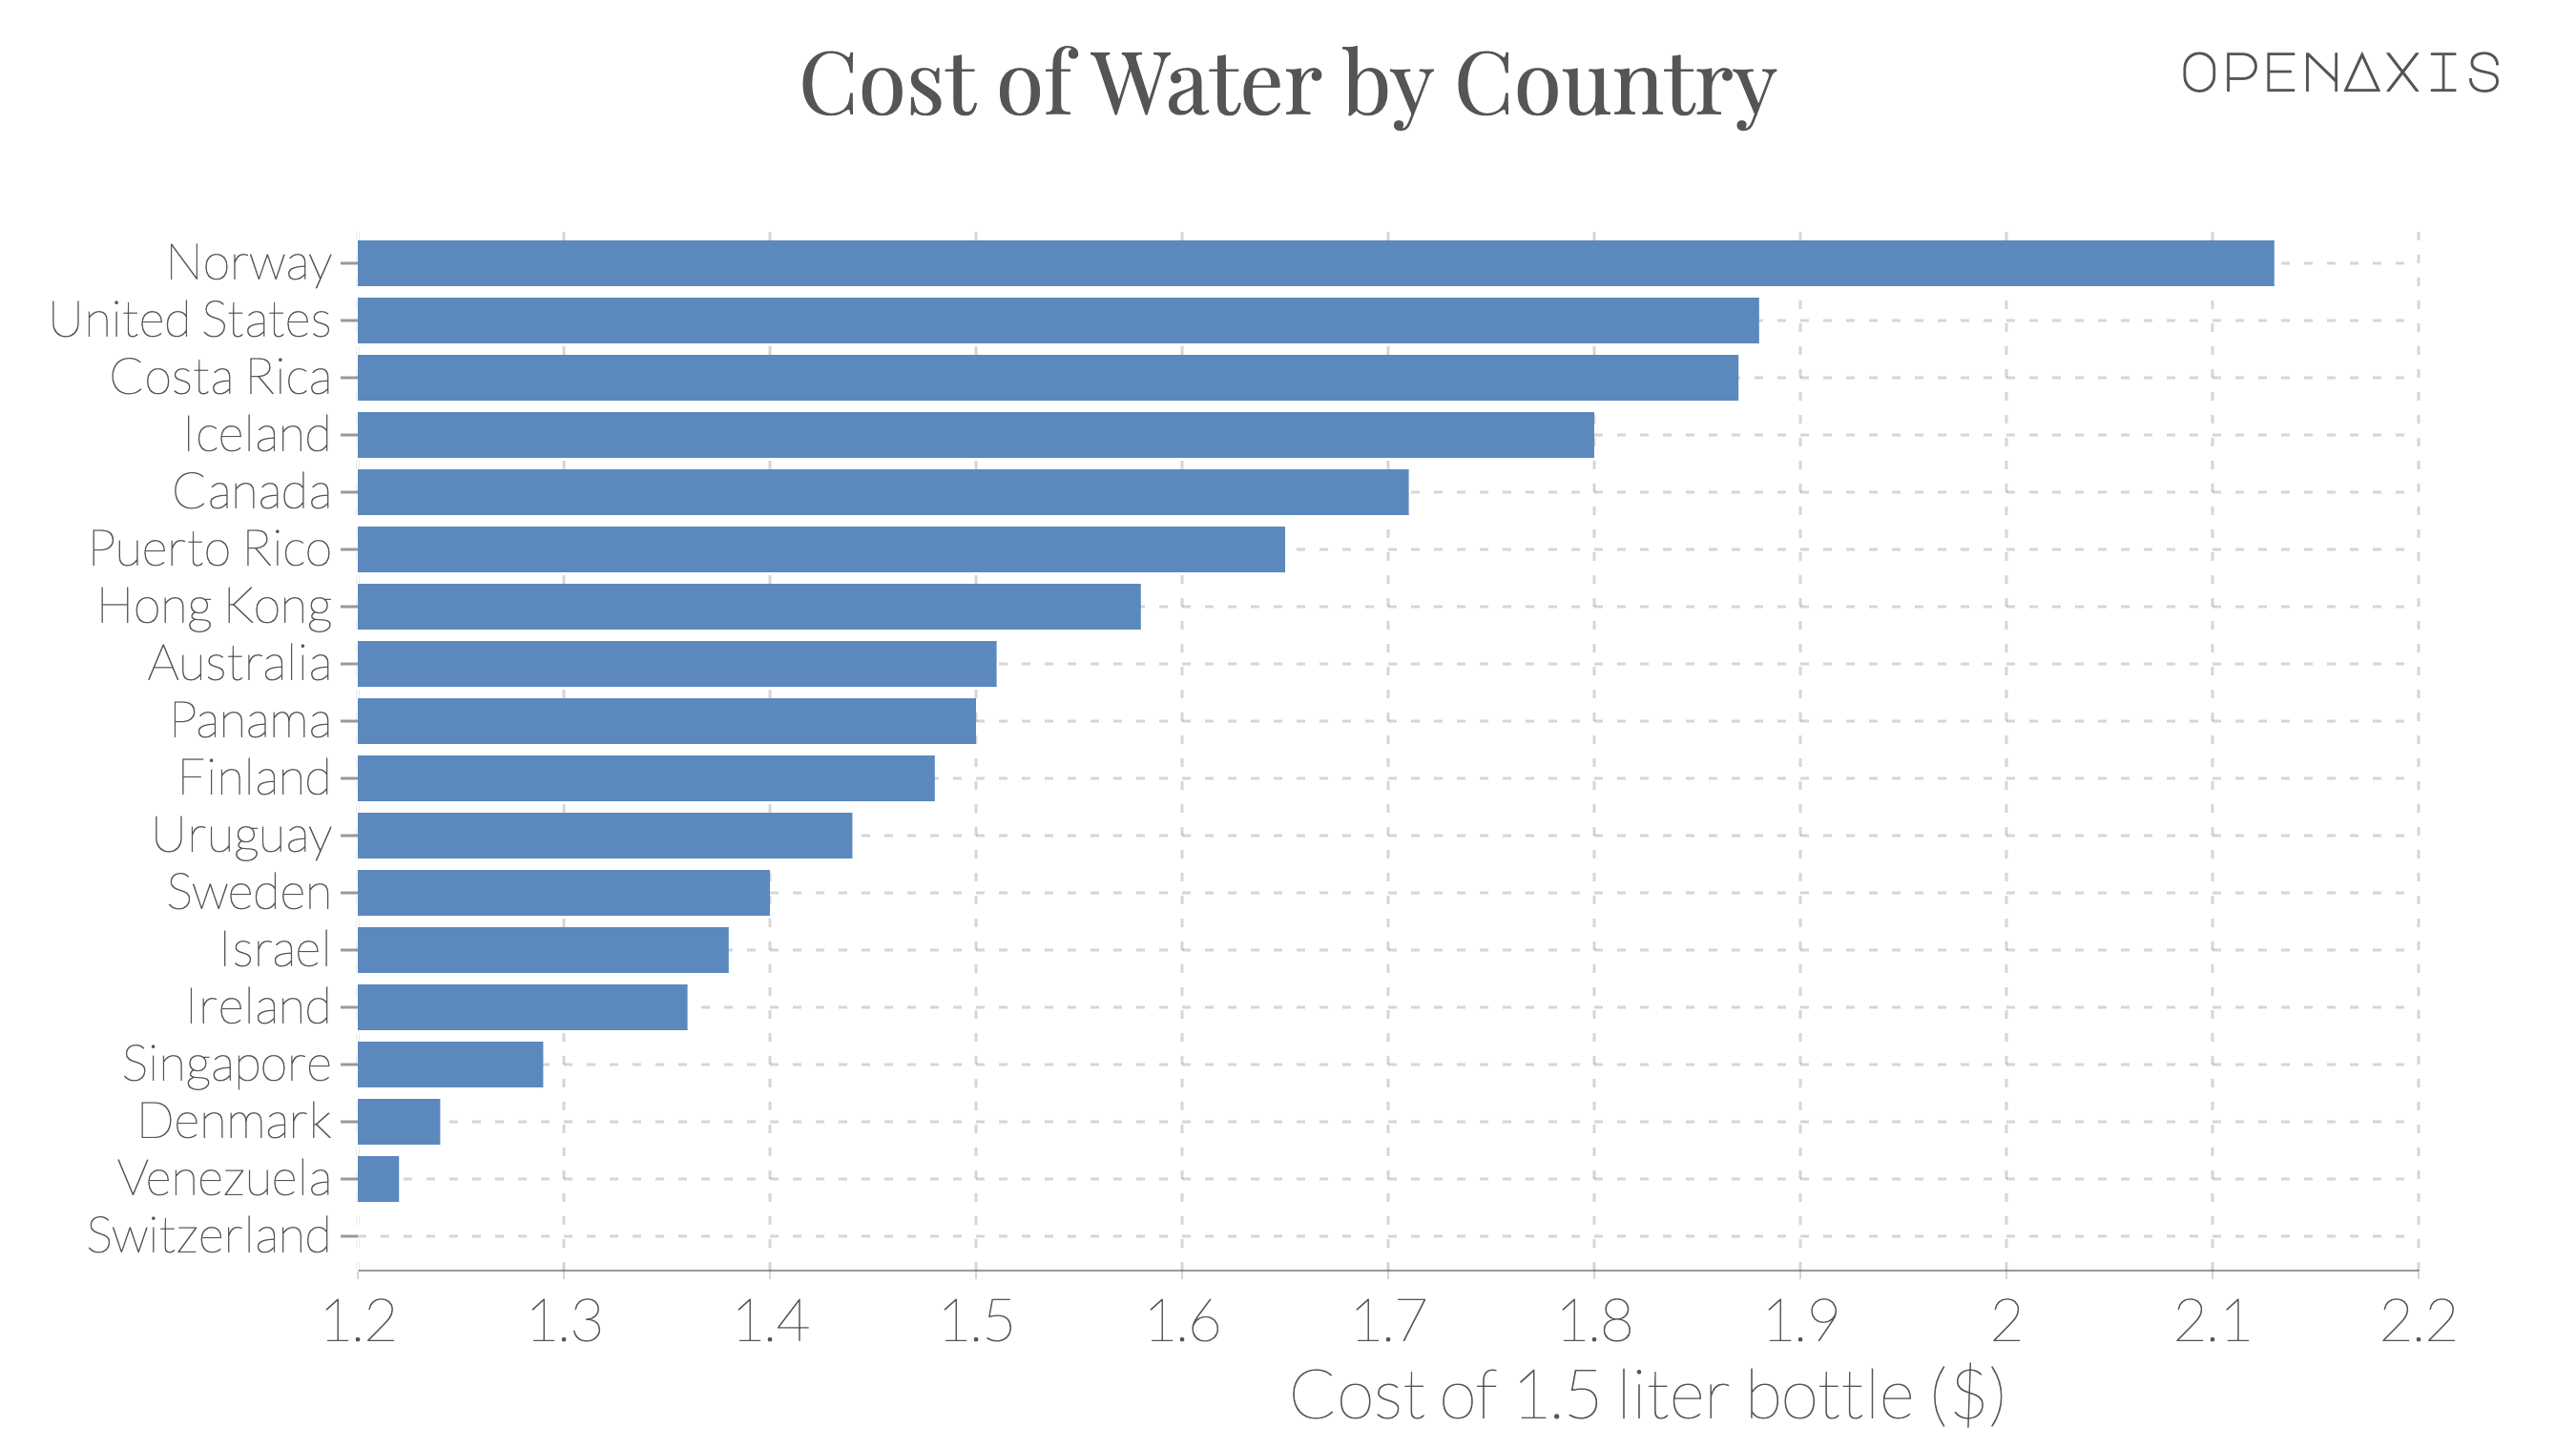 "Cost of Water by Country"